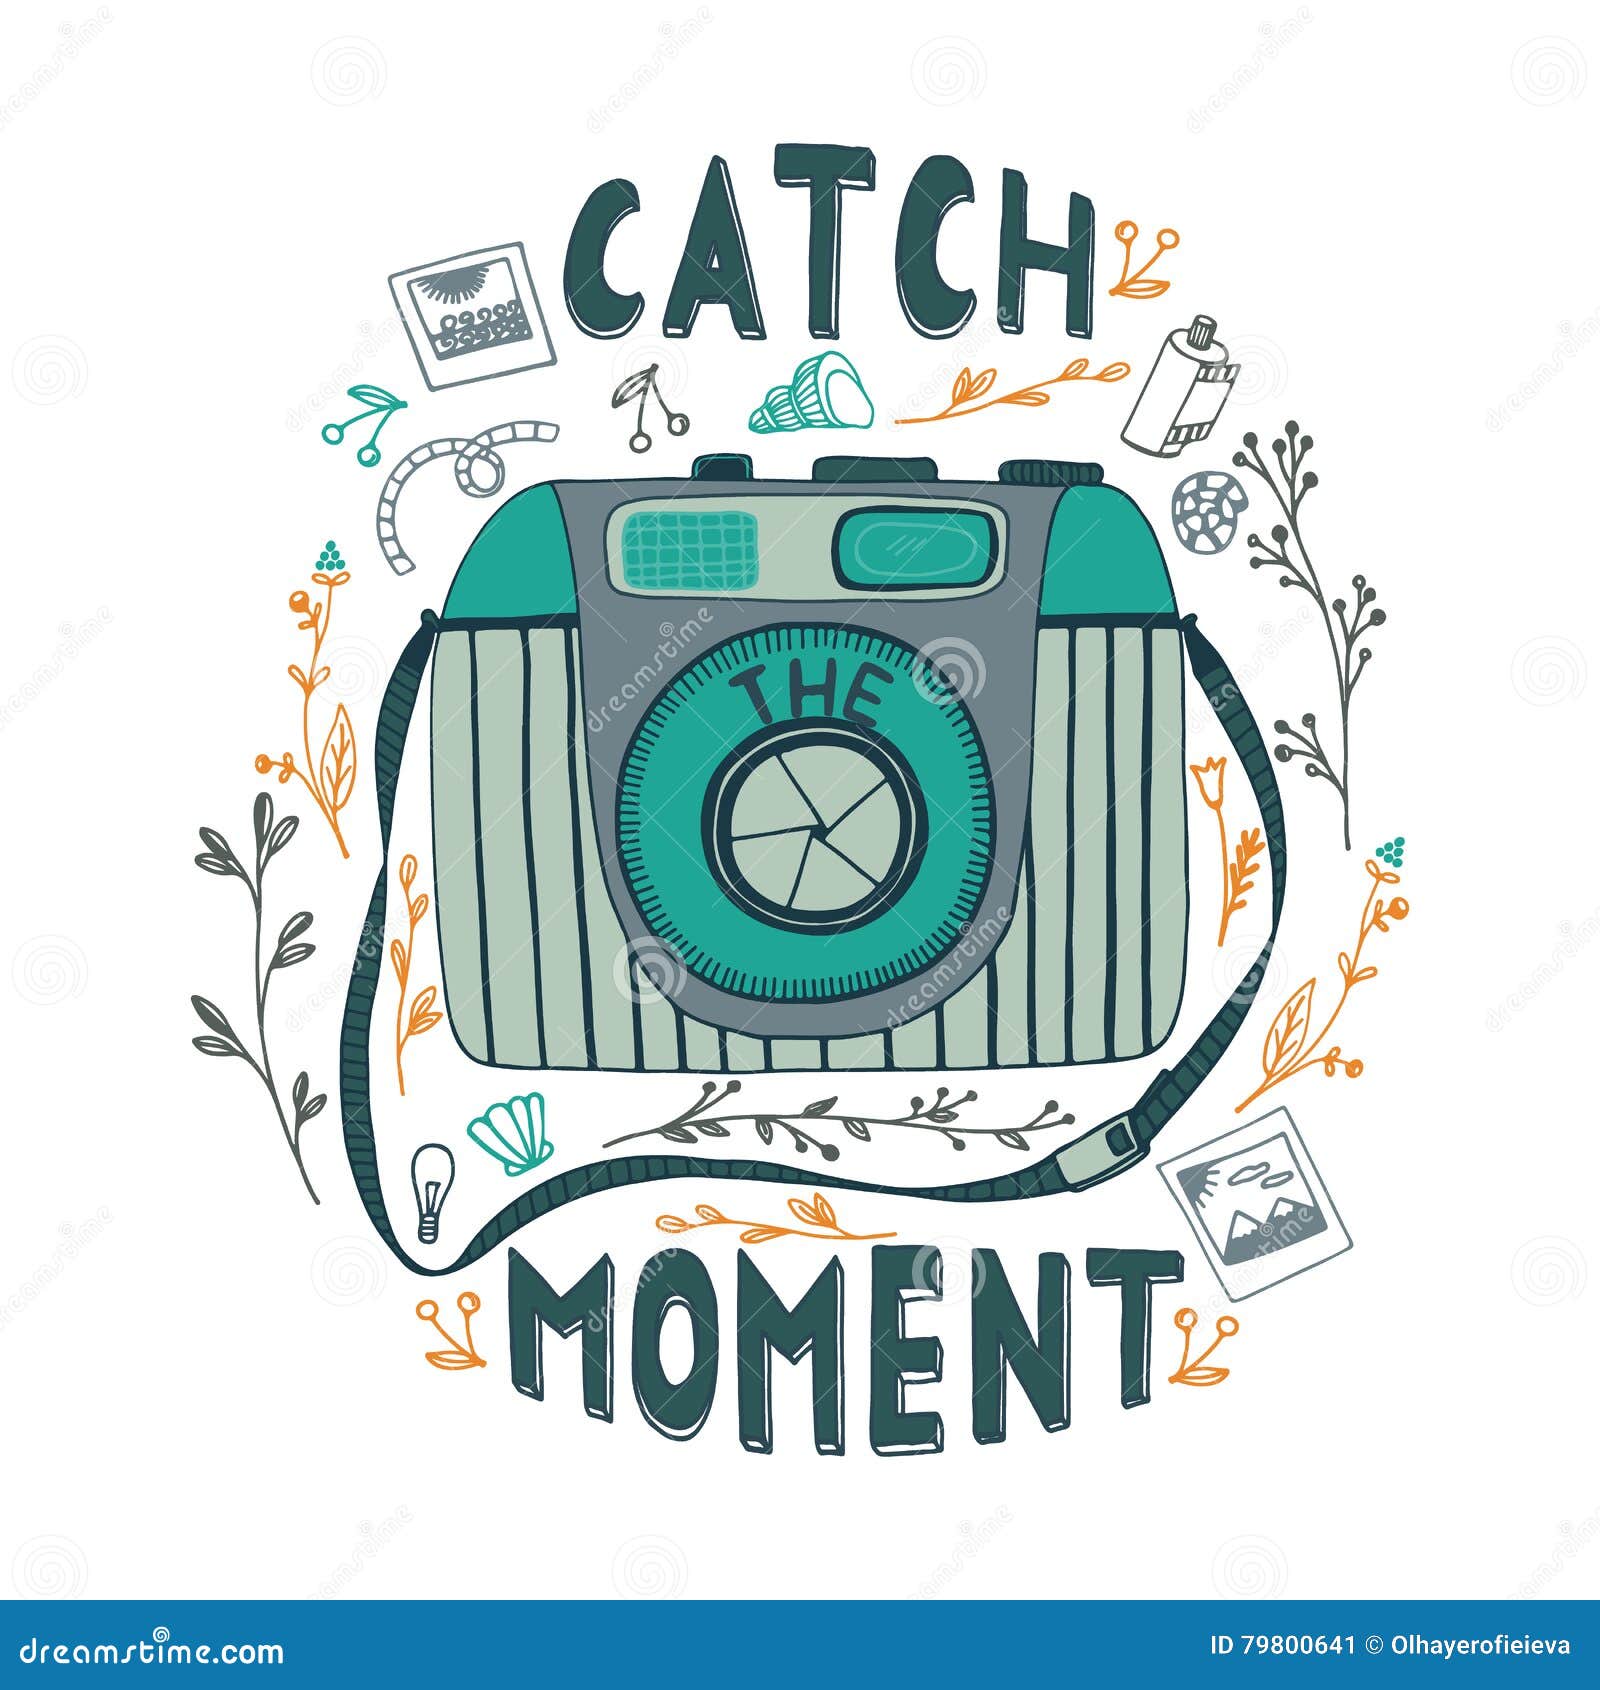 Catch The Moment Motivational Quote Stock Vector Illustration Of Badge Motivation